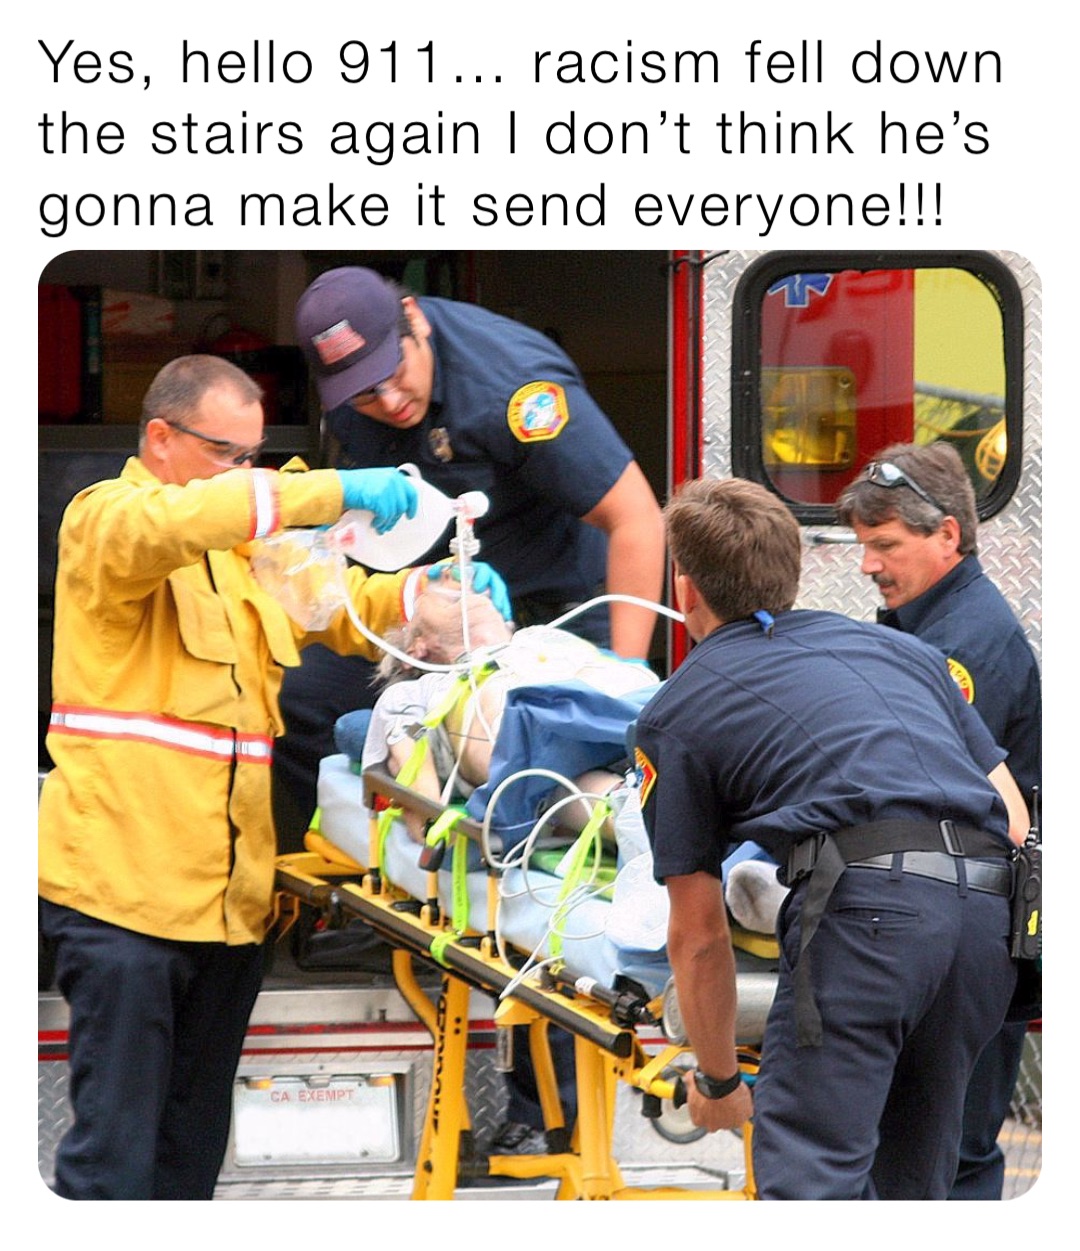 Yes, hello 911… racism fell down the stairs again I don’t think he’s gonna make it send everyone!!!